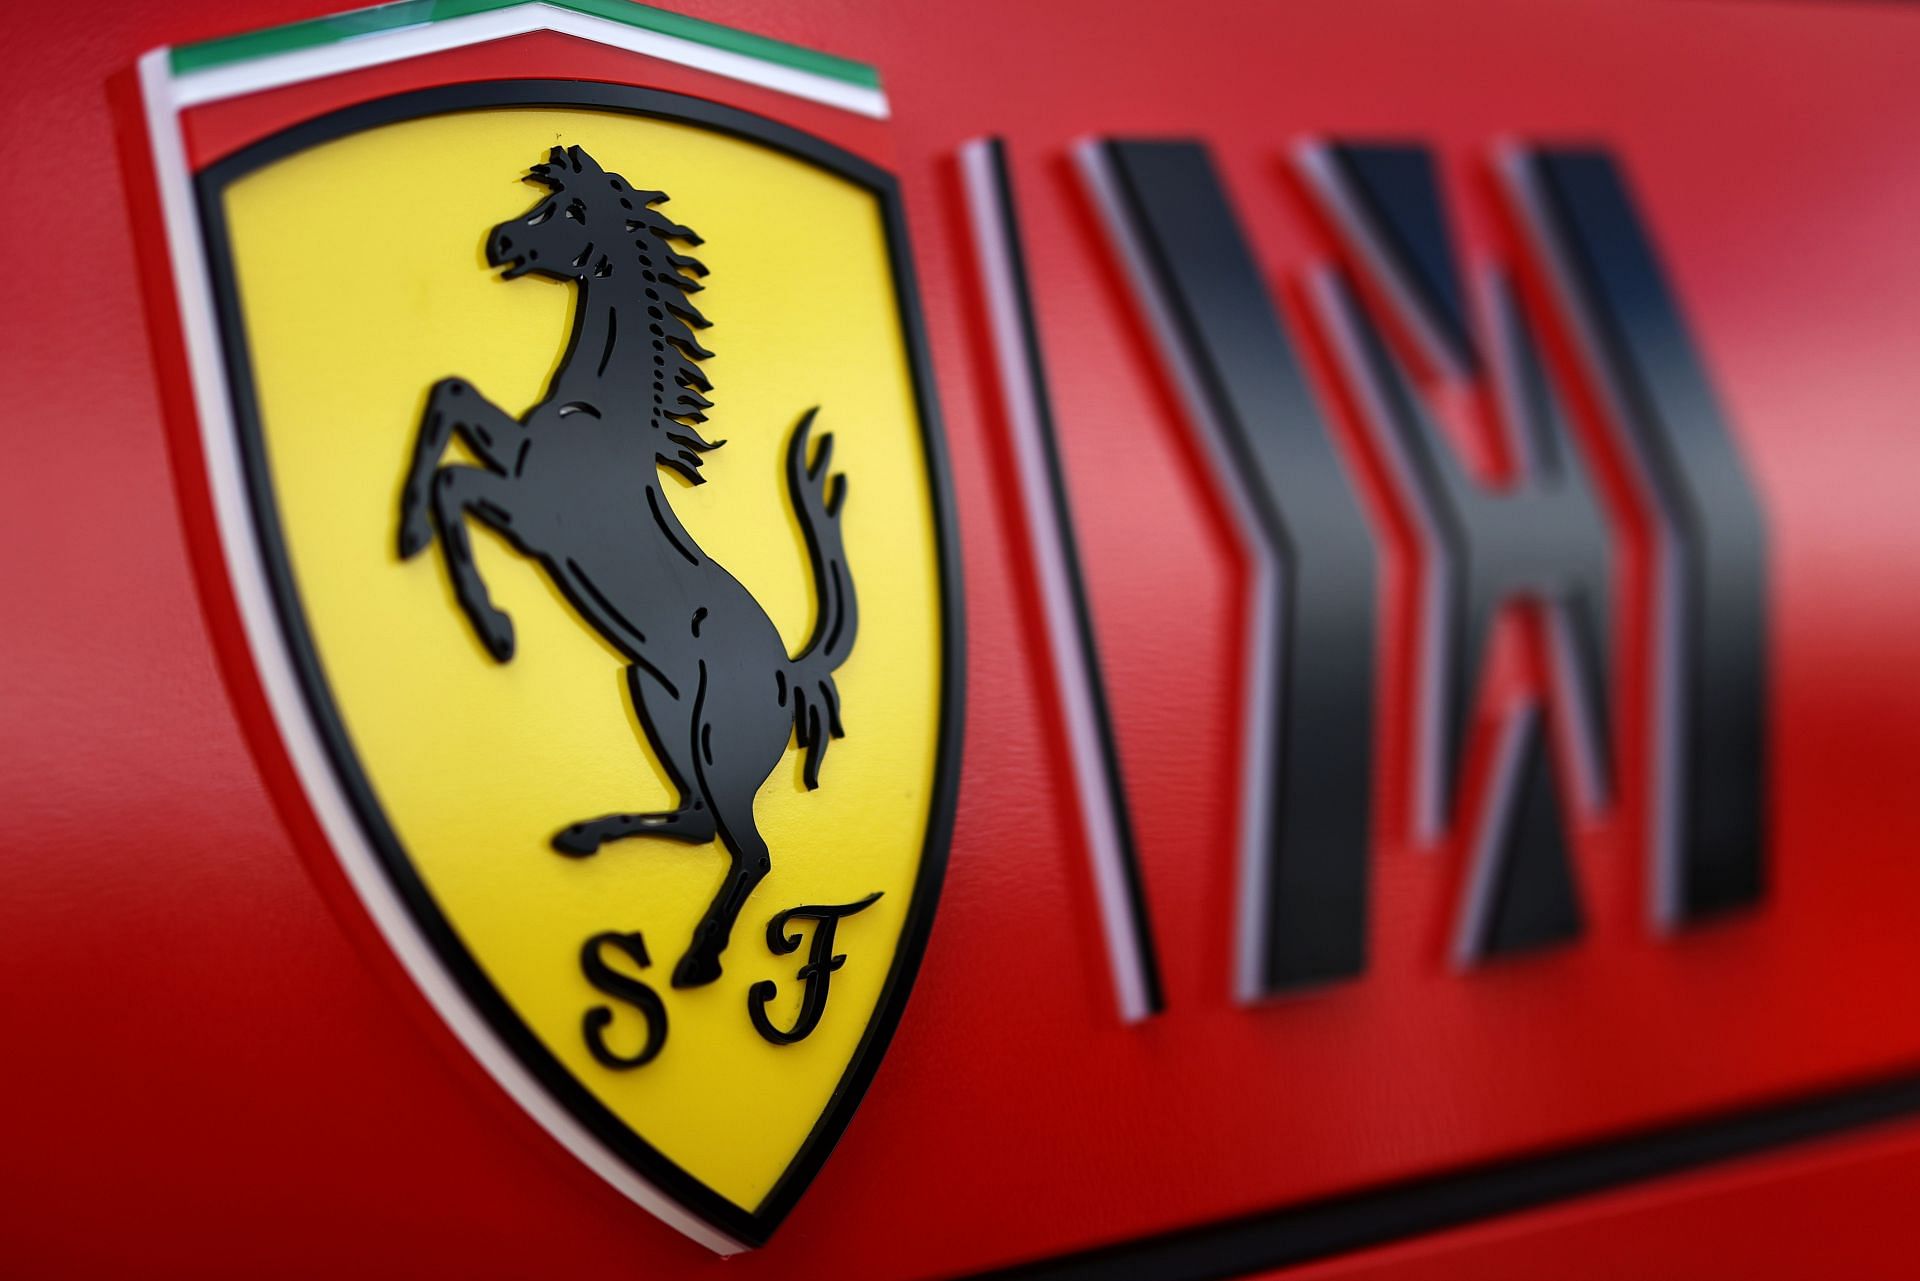 F1 2023 car launch: Ferrari car reveal timings, where to watch, and more